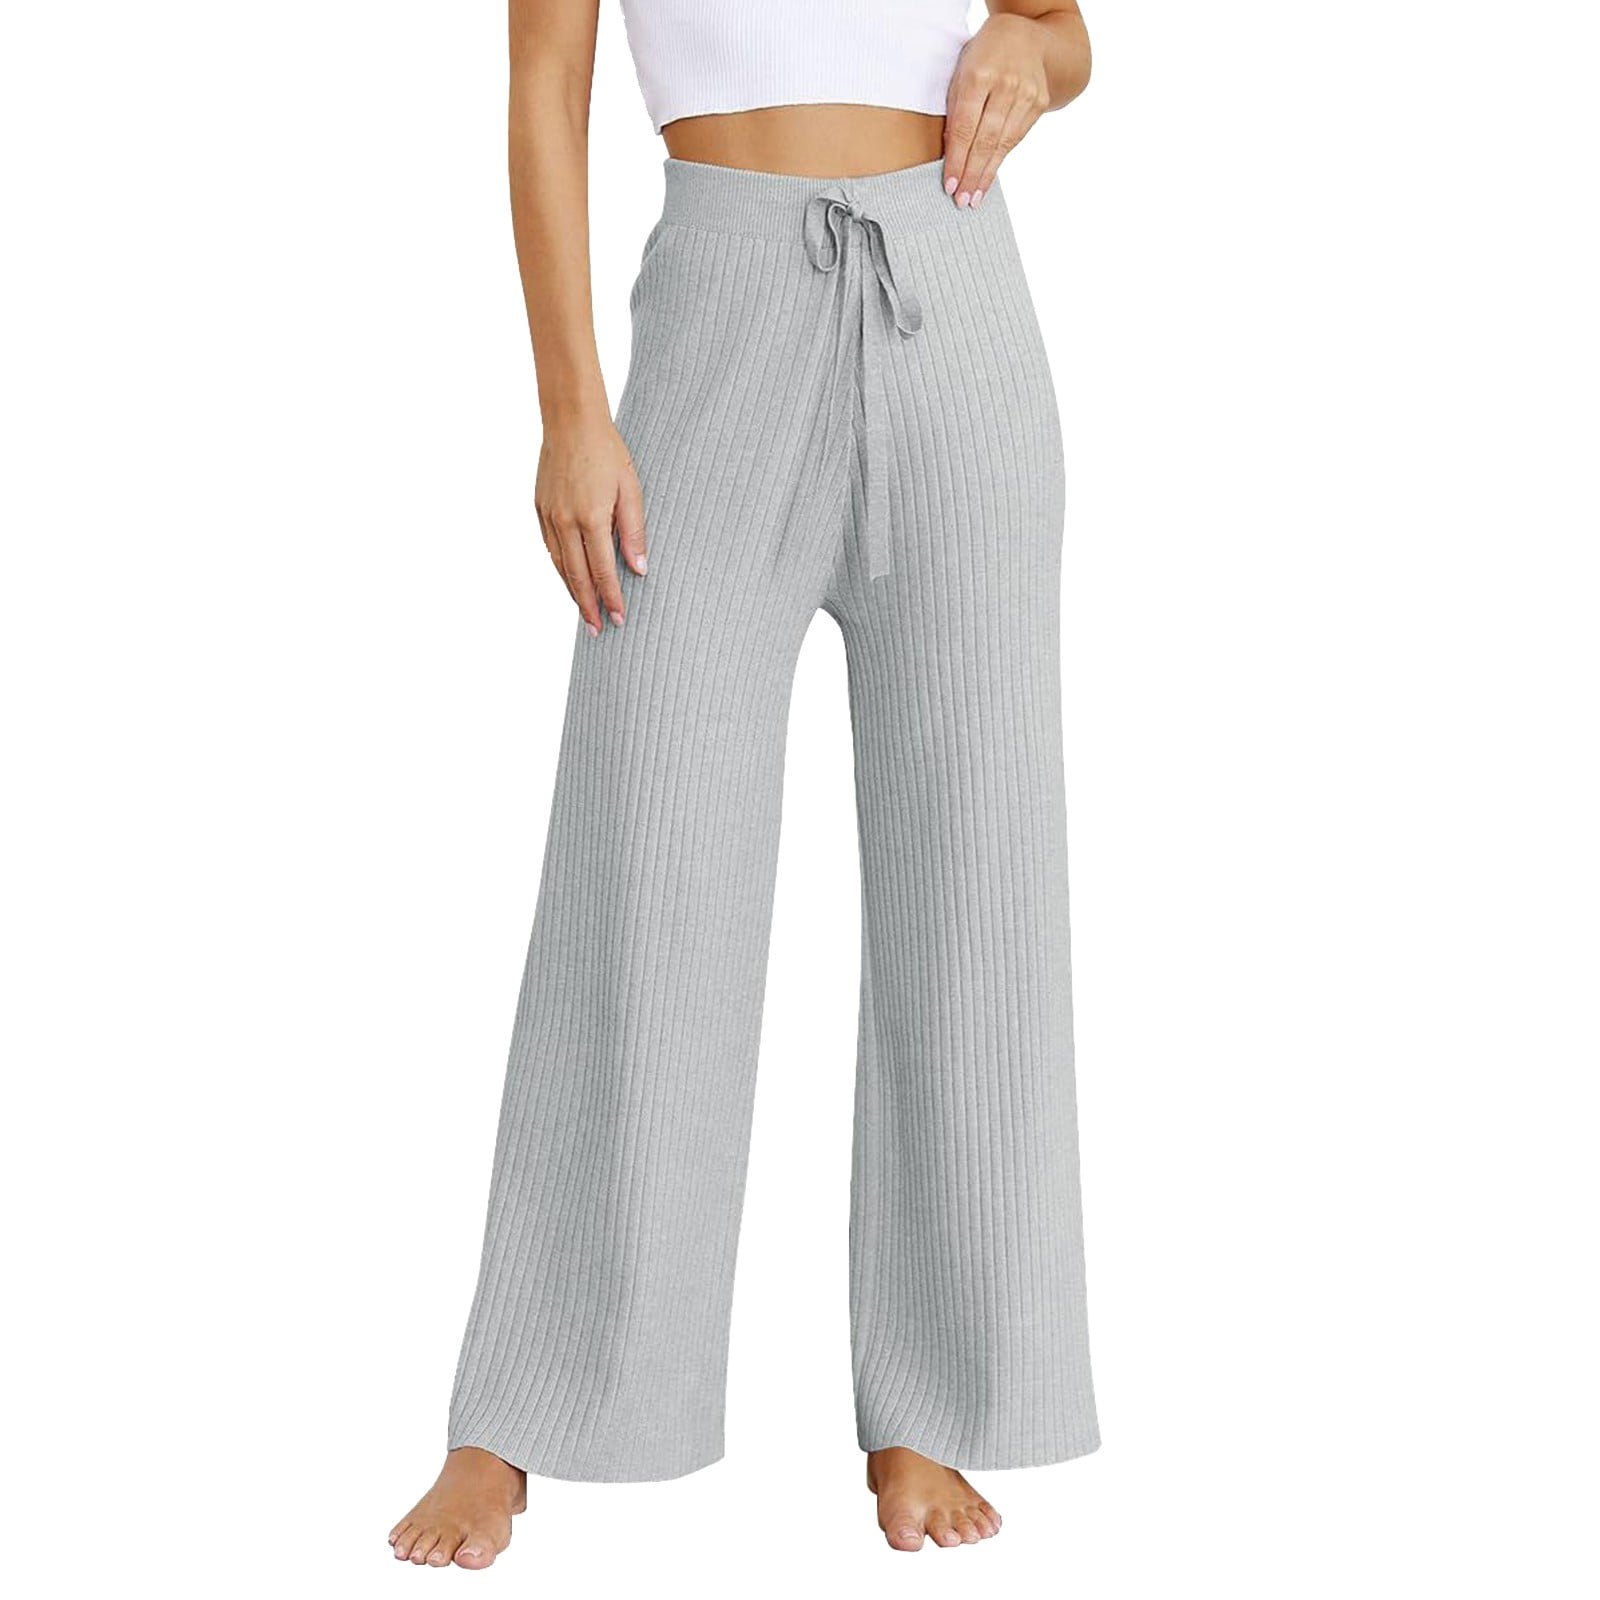 Korean Style Womens 9 Point Knitted Sweatpants Pure Wool Casual Sports  Linen Trousers Women With Small Legs From Blossommg, $41.57